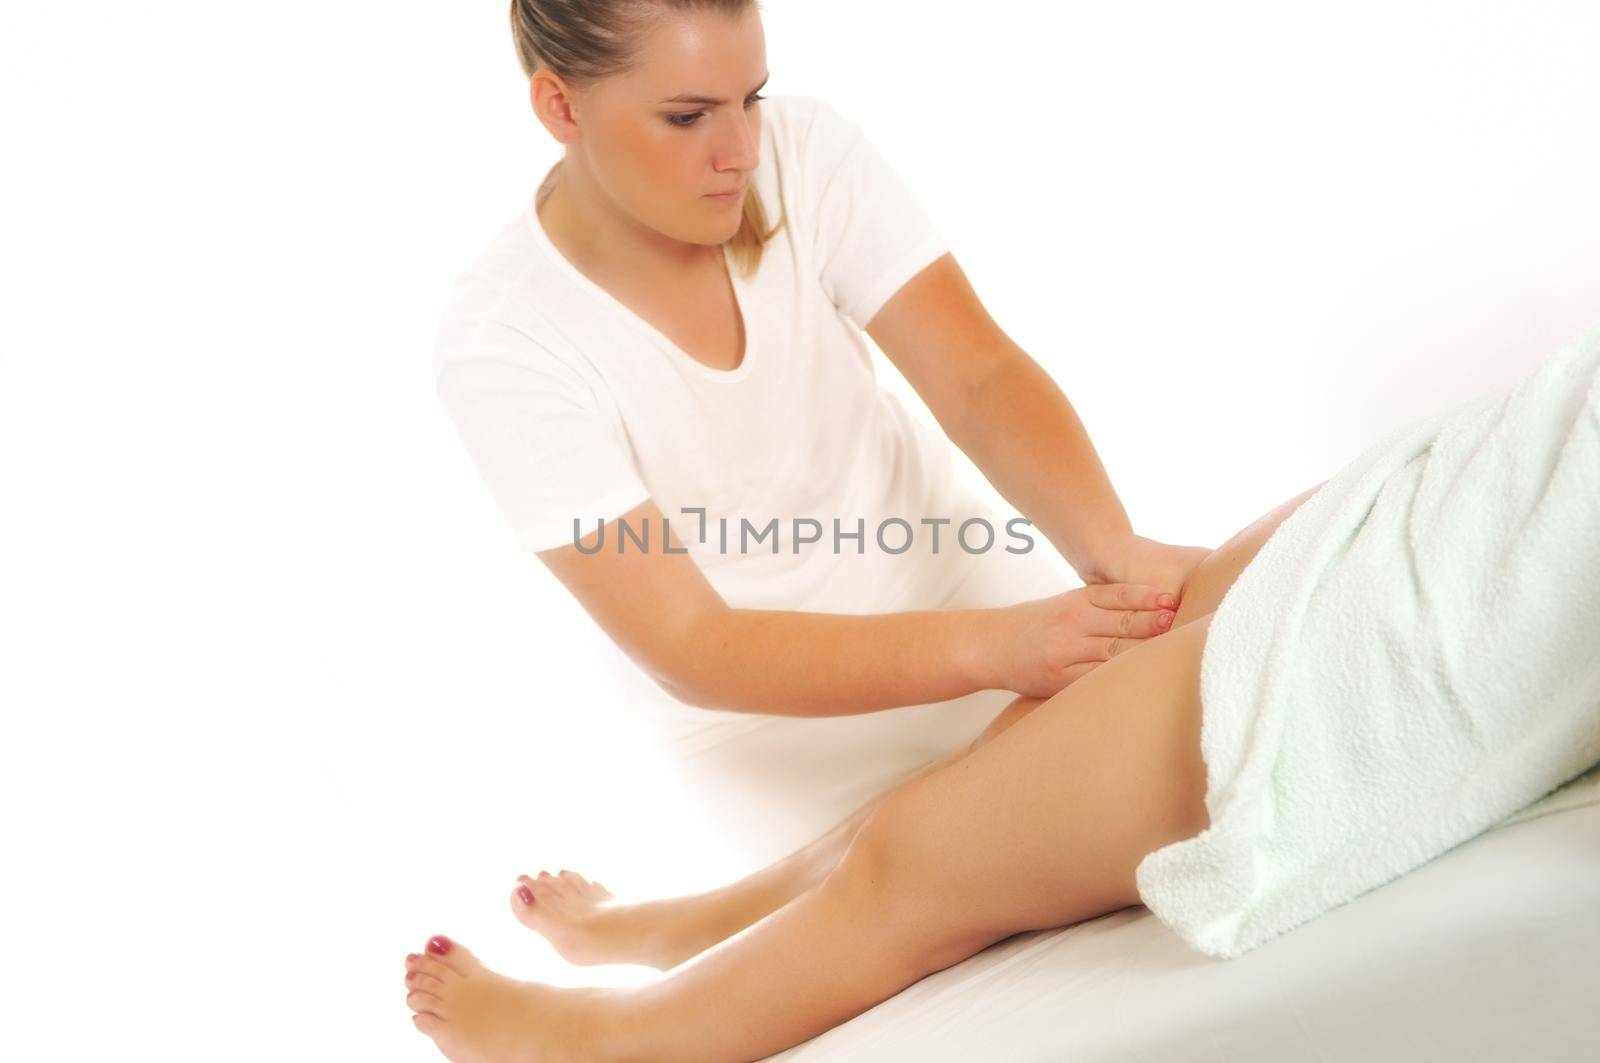 leg and foot massage at the spa and wellness center